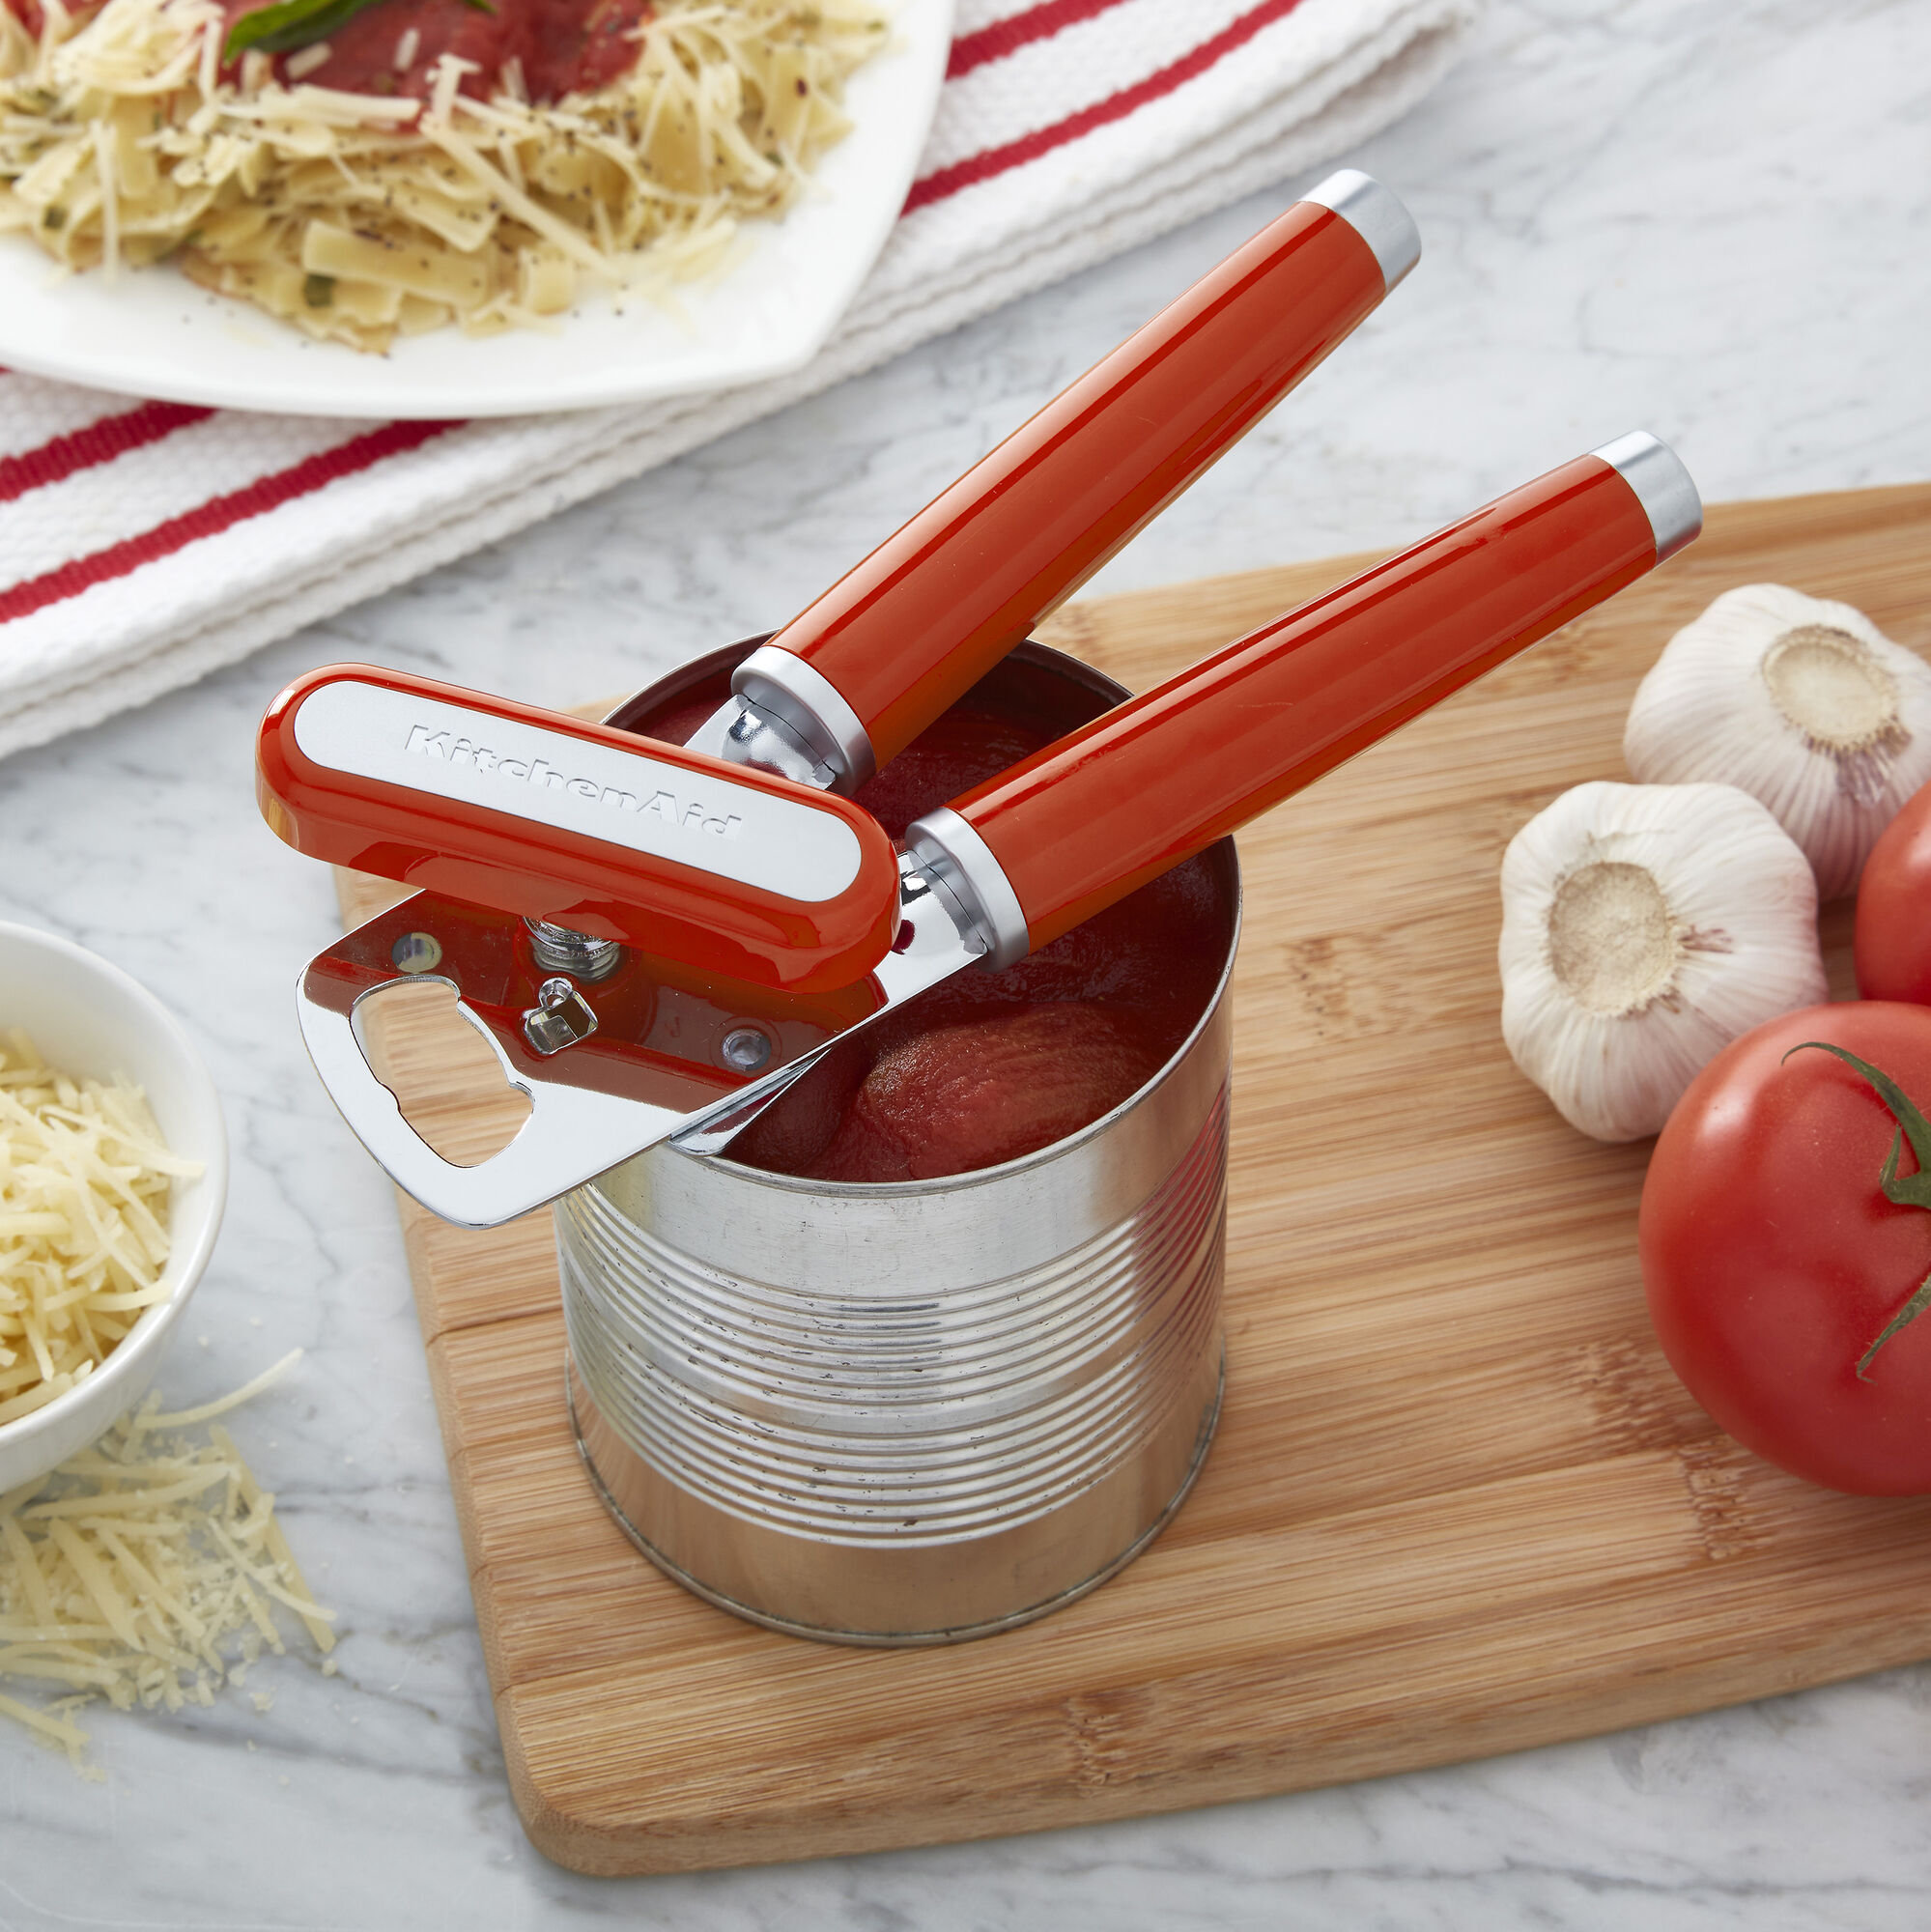 Kitchenaid Classic Multi-function Can Opener with Bottle Opener in